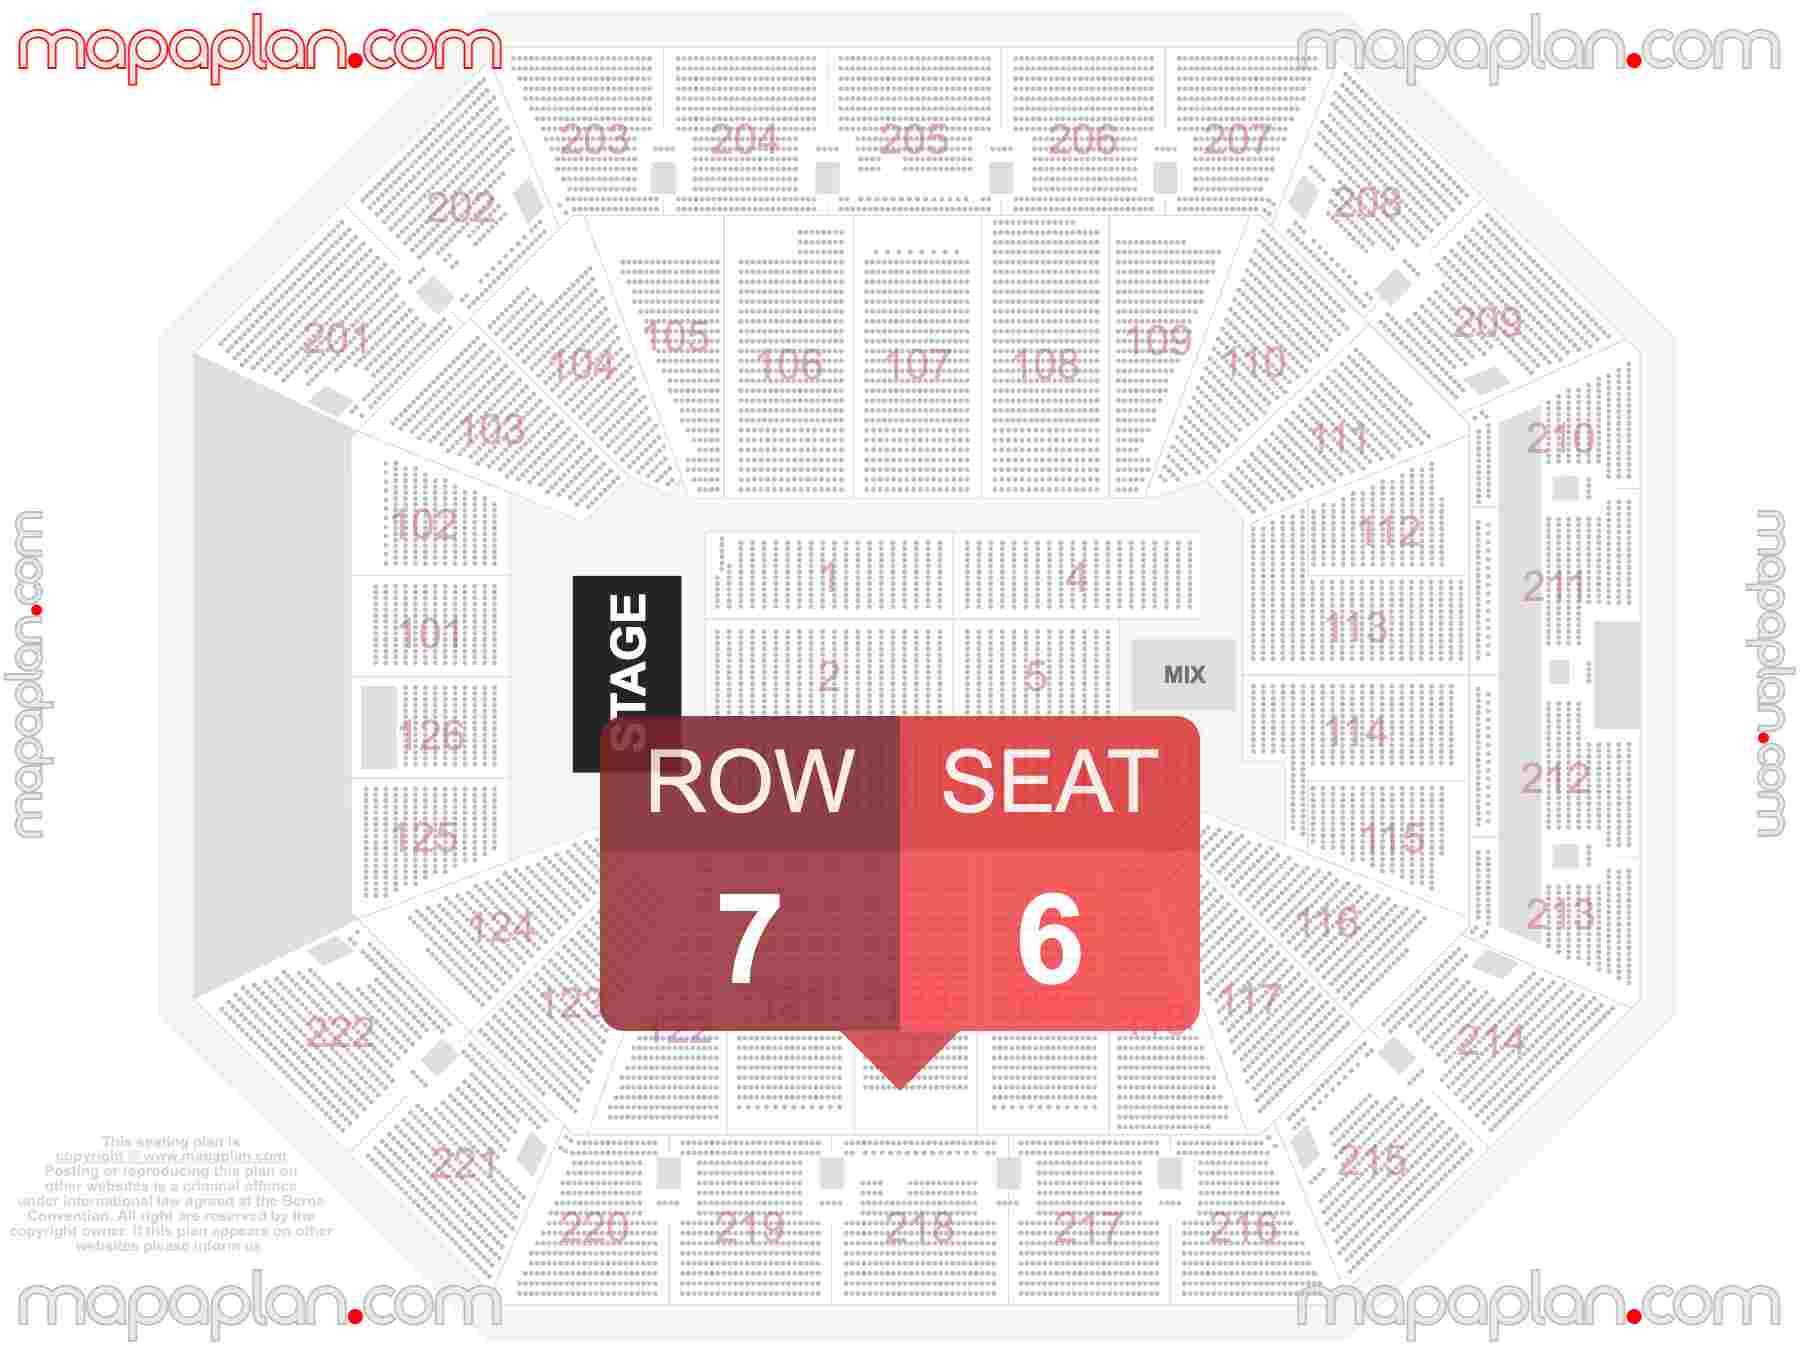 Sacramento Golden 1 Center seating chart Concert detailed seat numbers and row numbering chart with interactive map plan layout